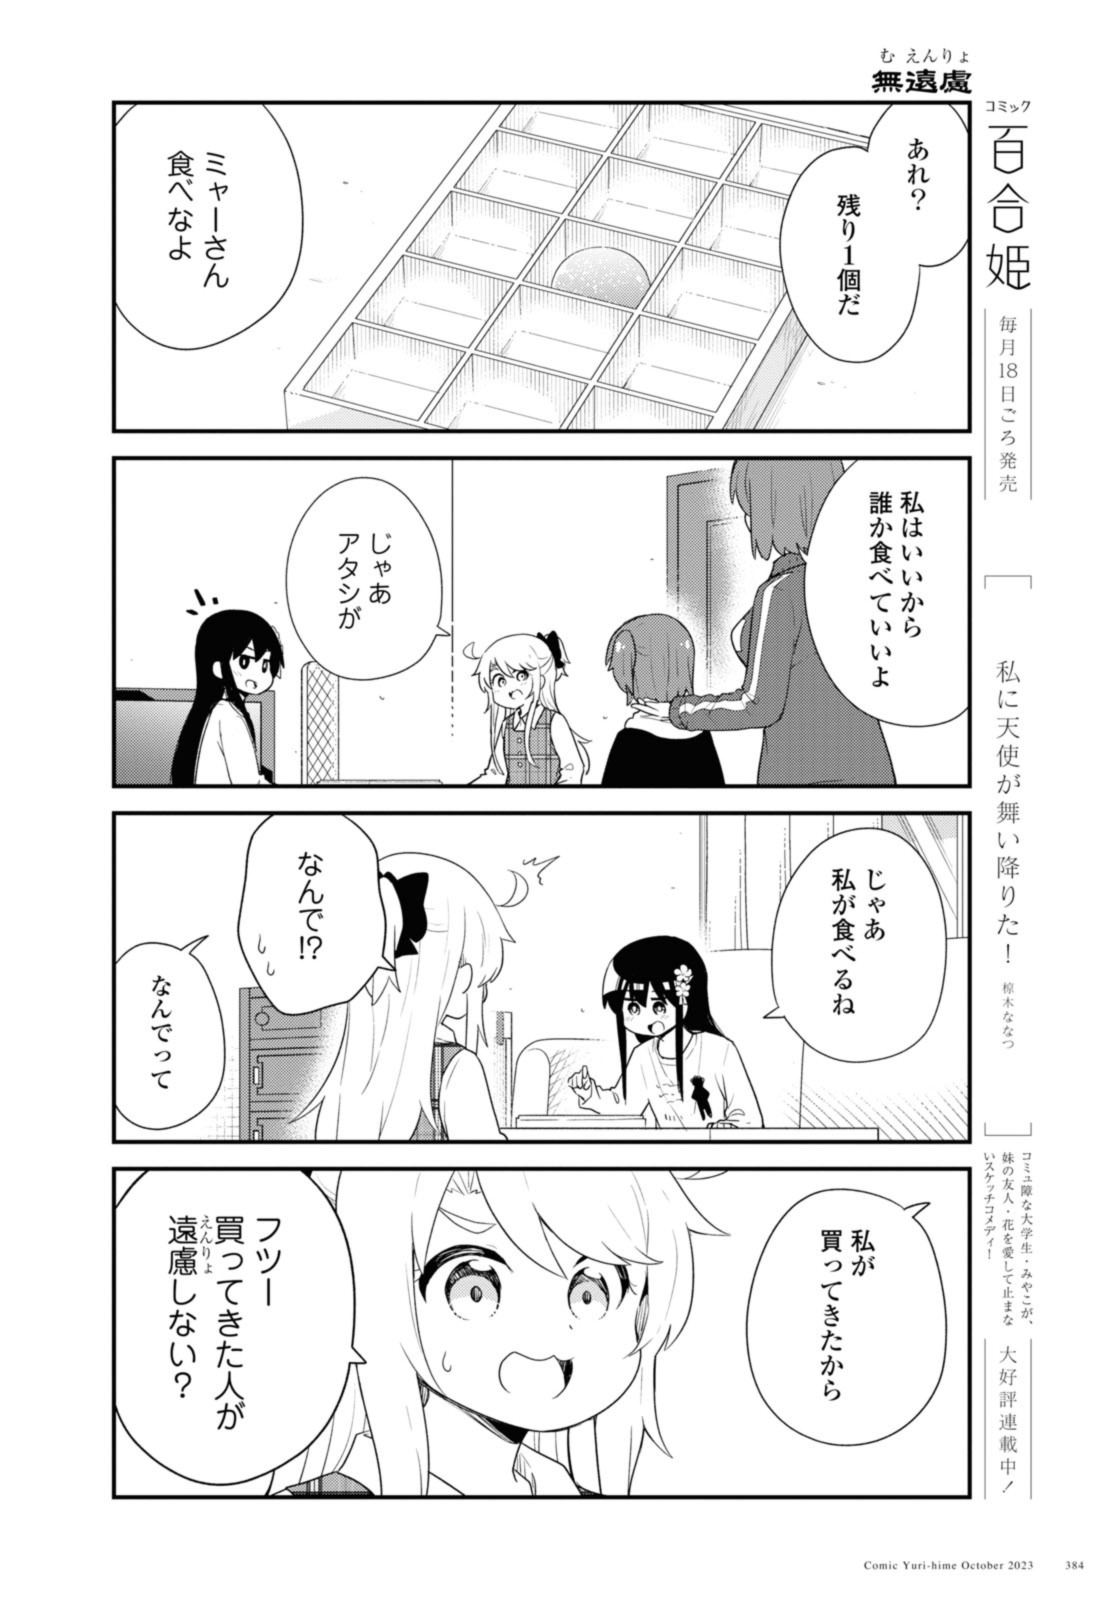 Wataten! An Angel Flew Down to Me 私に天使が舞い降りた！ 第109話 - Page 4